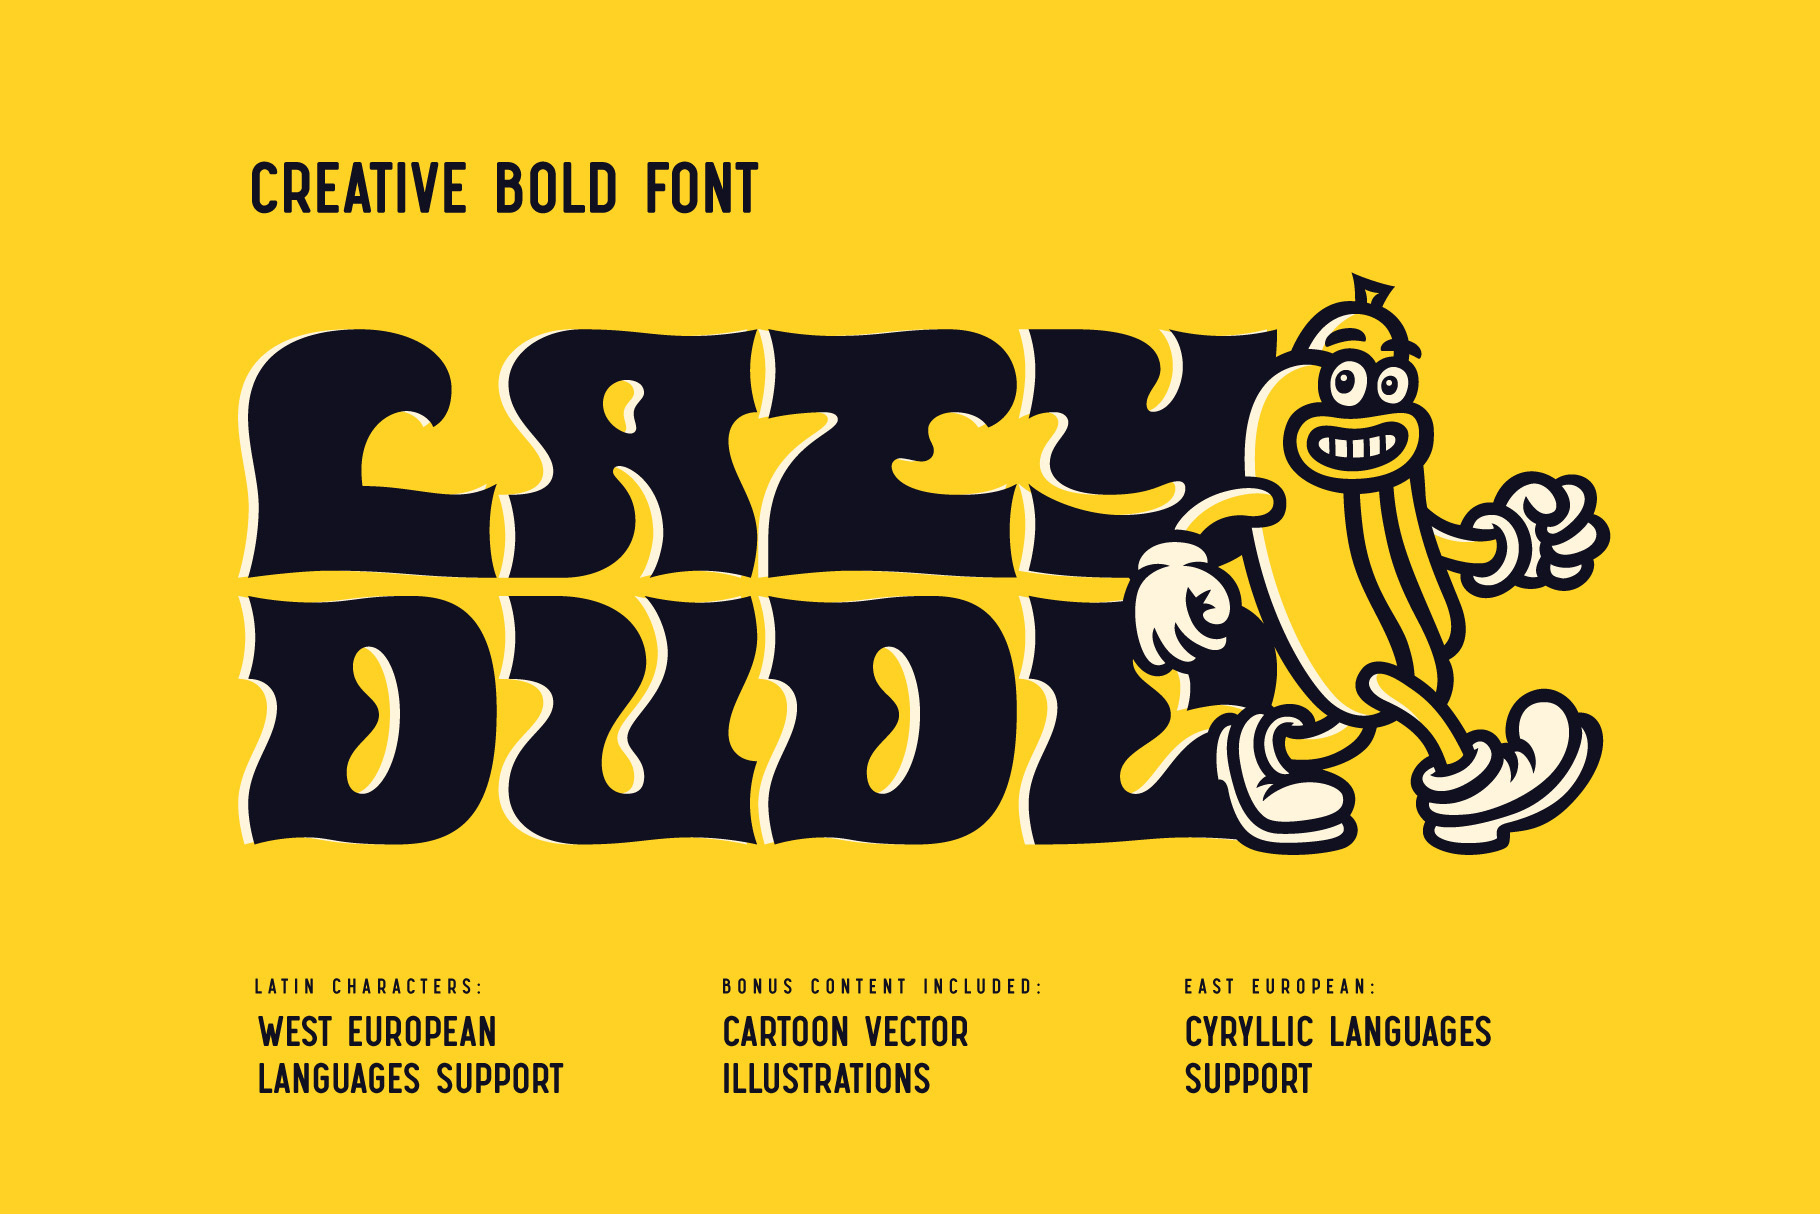 Lazy Dude - Bold Font and Illustrations.